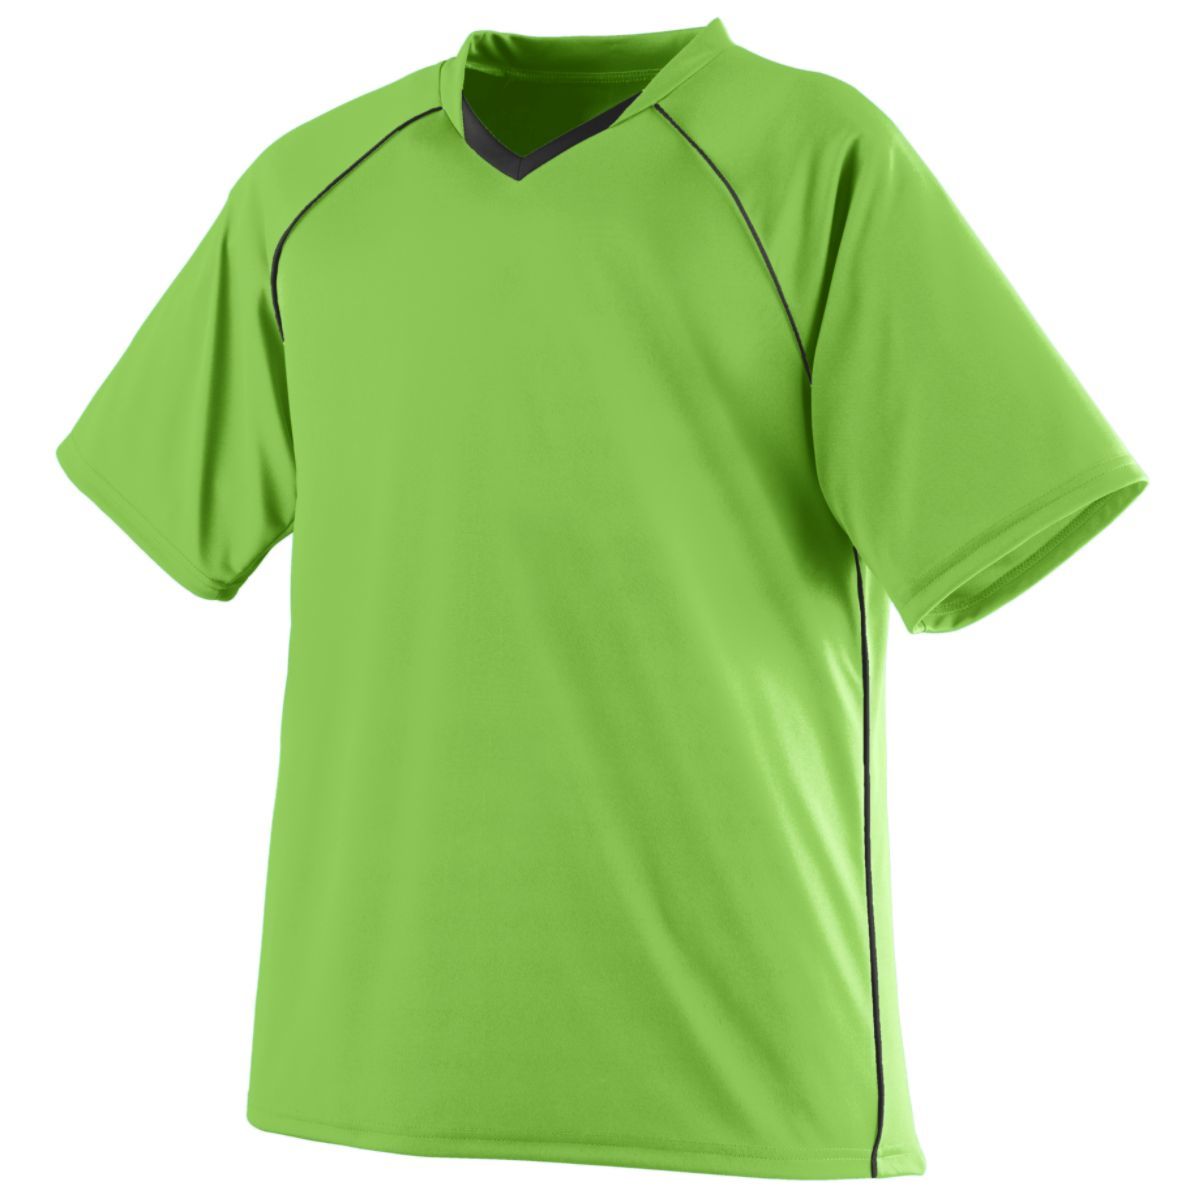 Augusta Sportswear Youth Striker Jersey in Lime/Black  -Part of the Youth, Youth-Jersey, Augusta-Products, Soccer, Shirts, All-Sports-1 product lines at KanaleyCreations.com